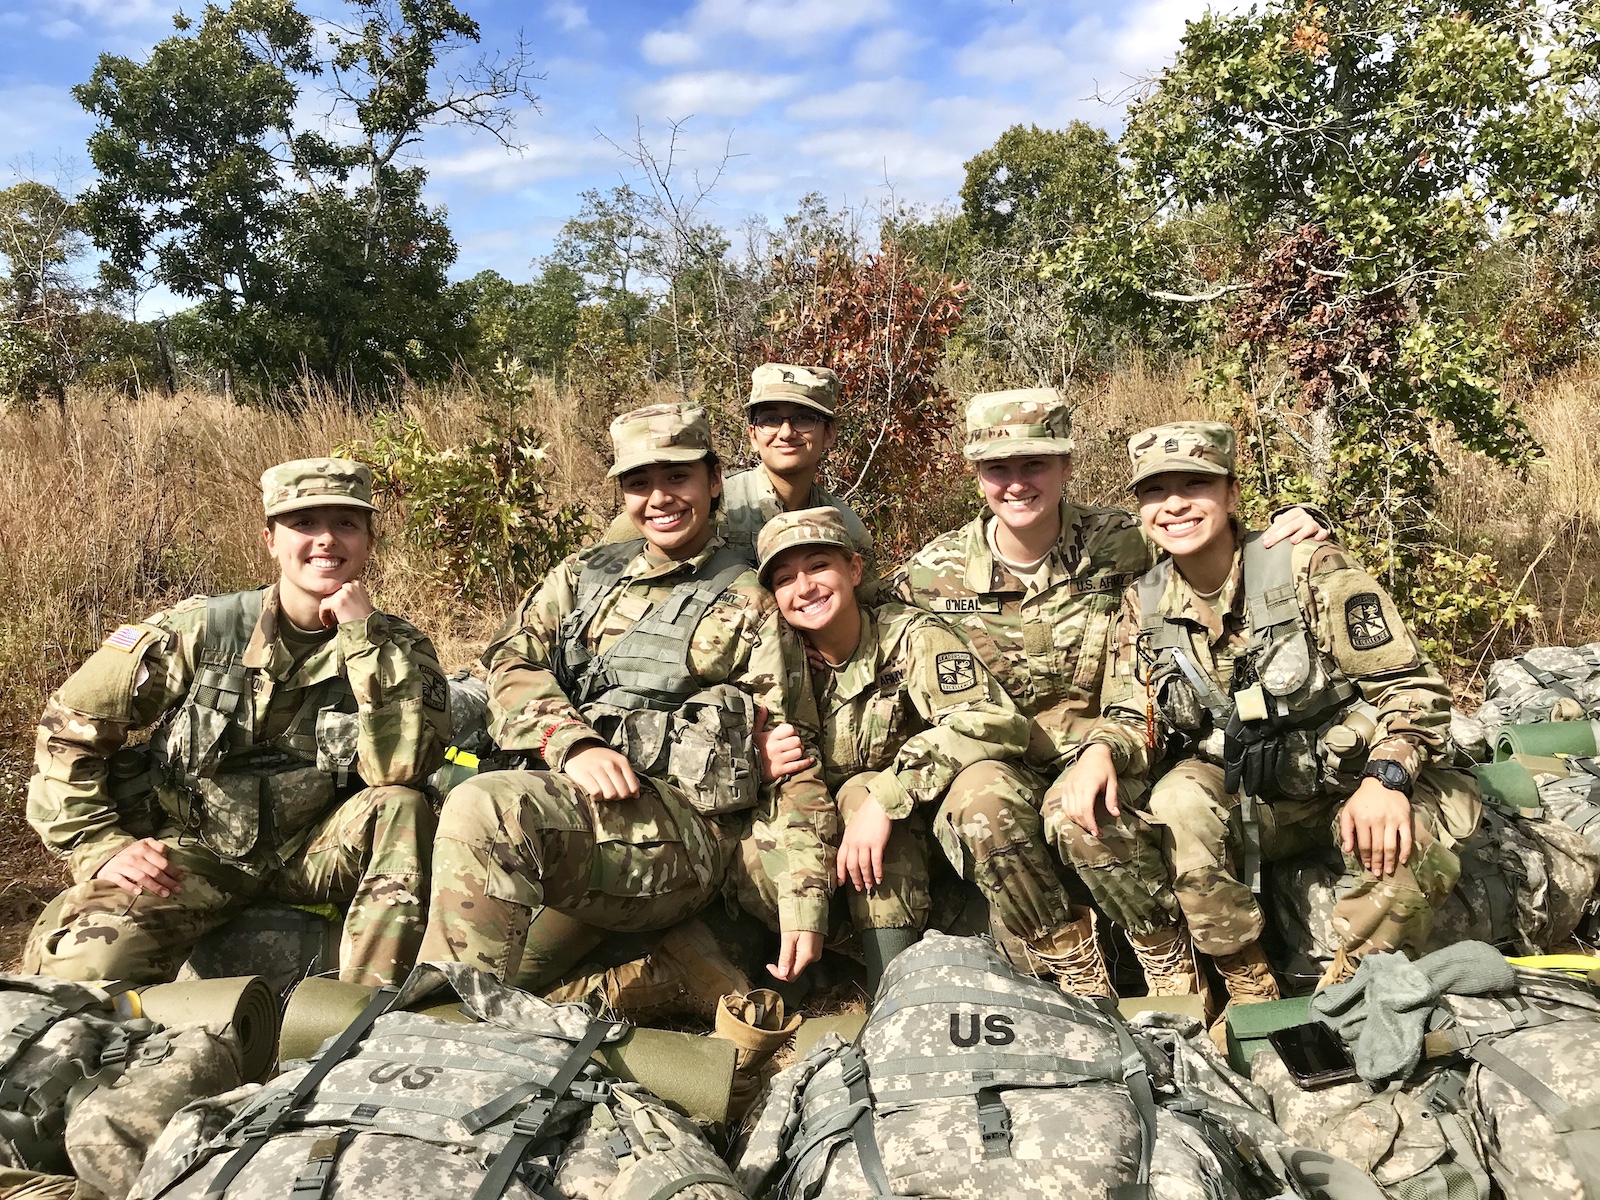 O’Neal (second from the right) is commissioning into the Army as a second lieutenant in the first brigade combat team in the 82nd Airborne Division at Fort Bragg, North Carolina.